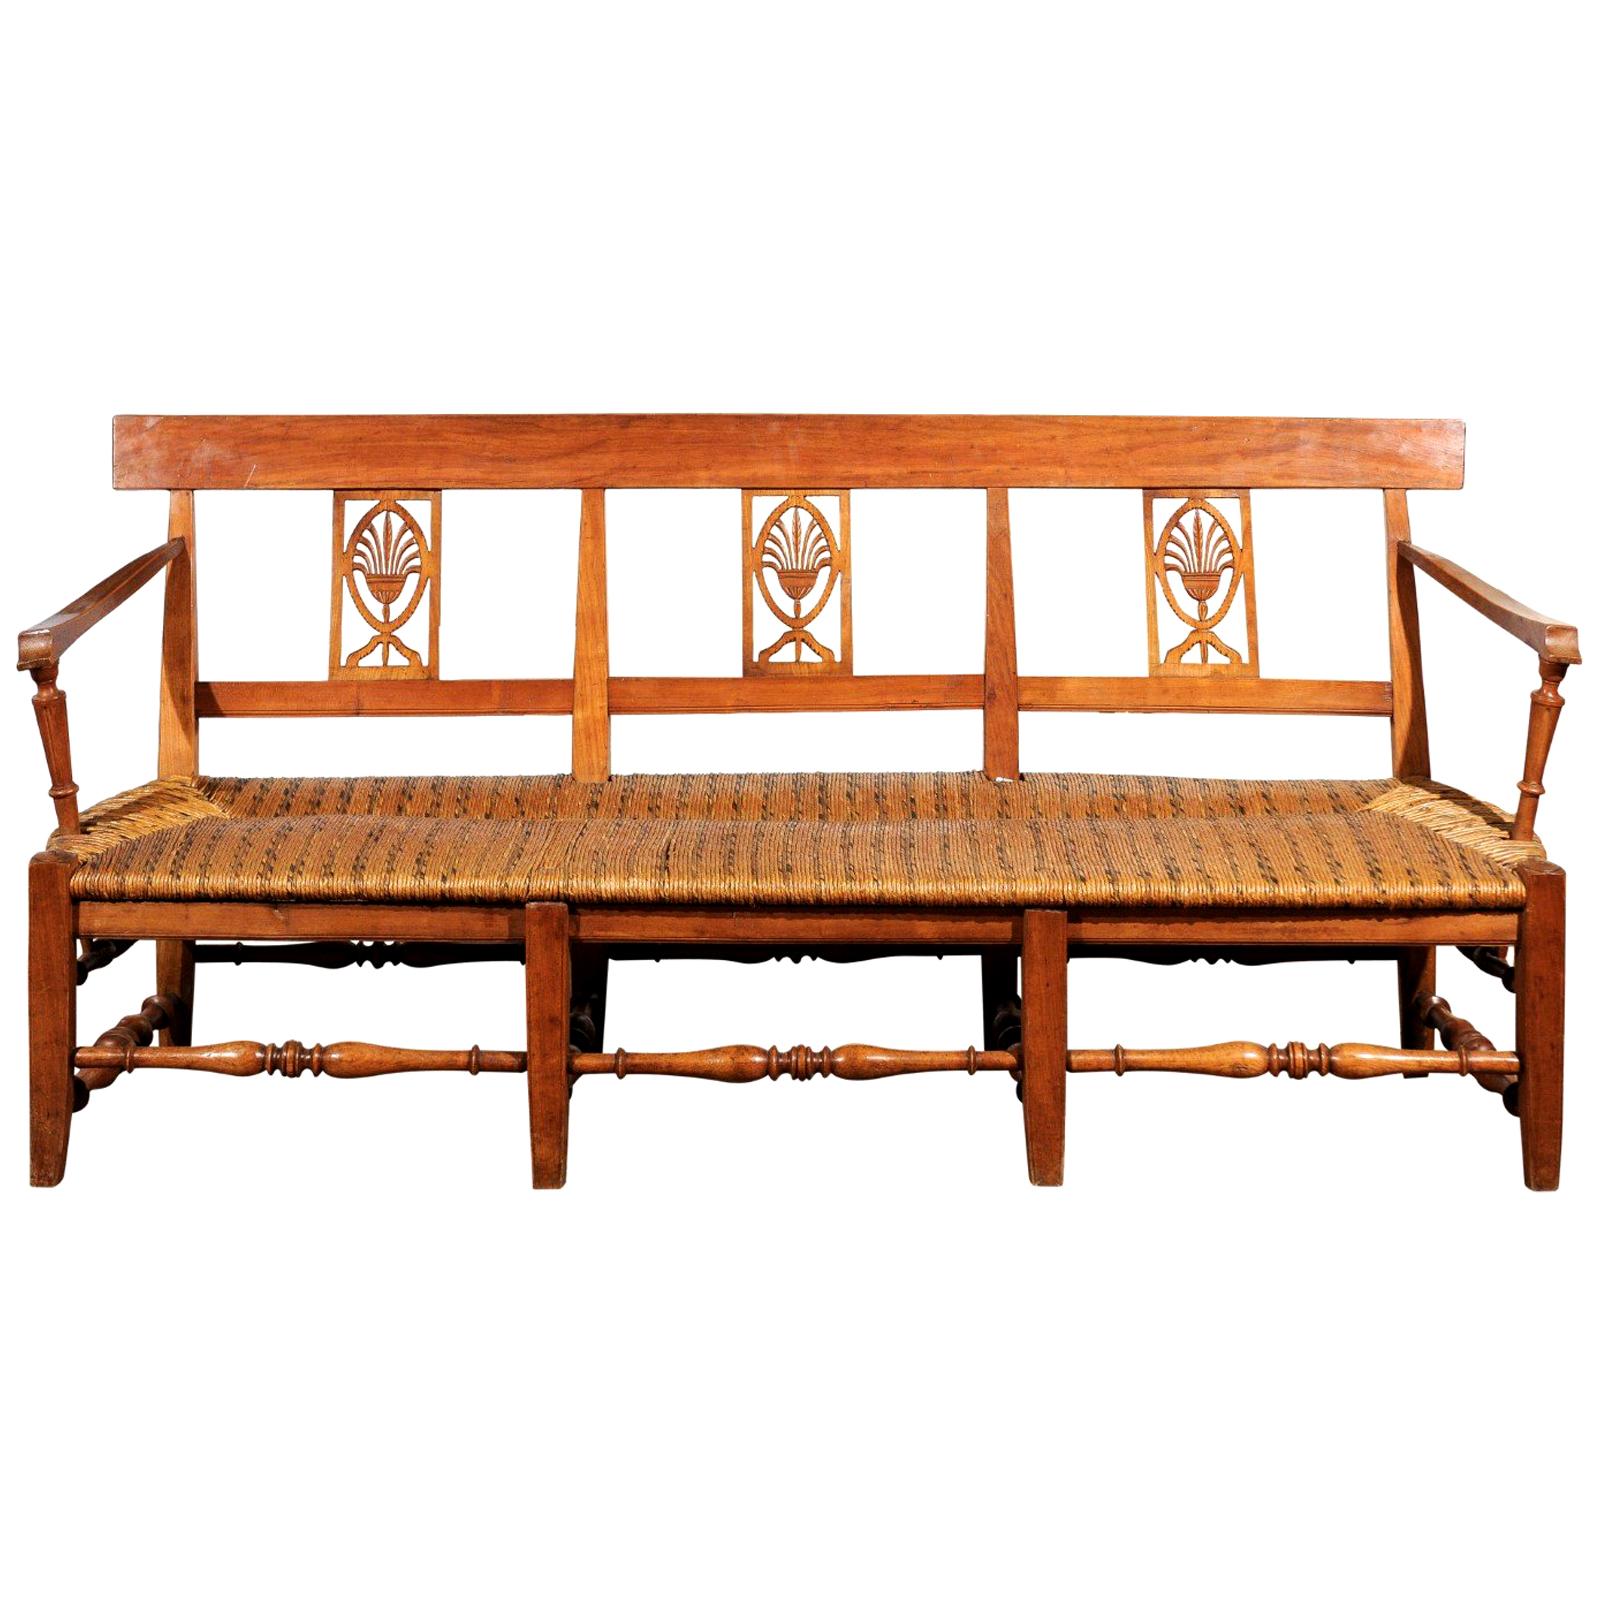 French Provençal Directoire Style 1810s Wooden Bench with Stylized Palmettes